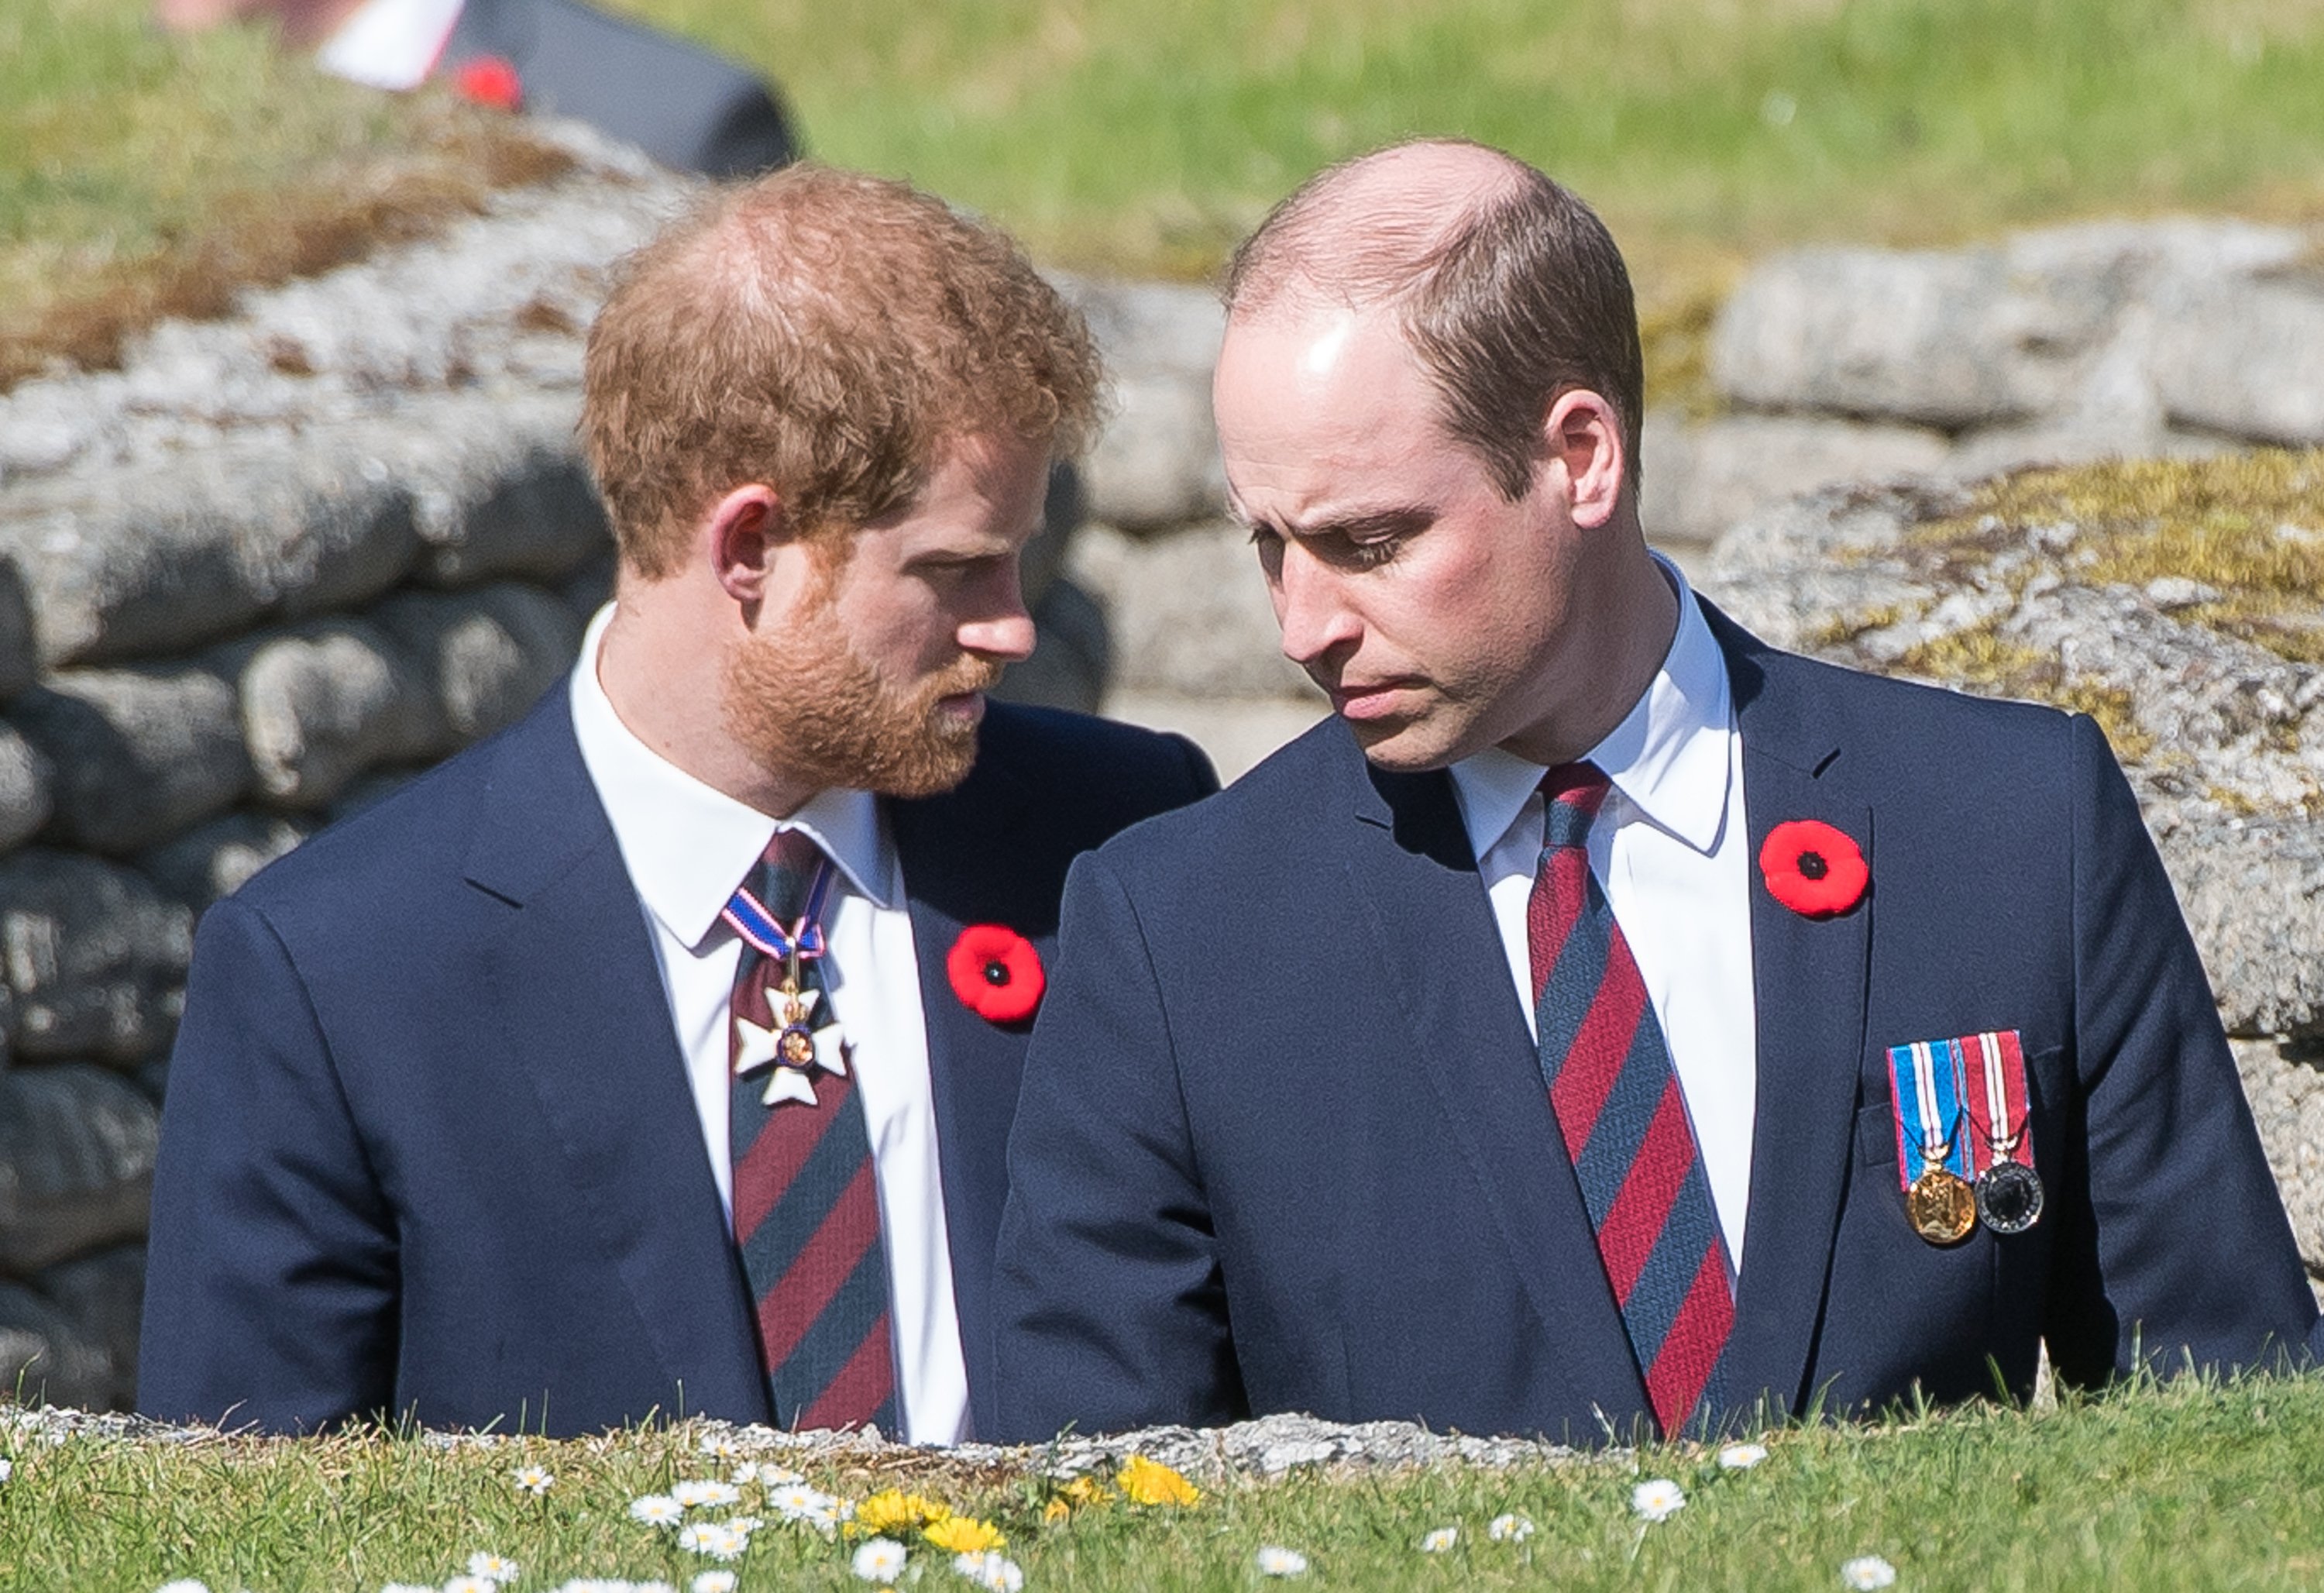 Prince William and Prince Harry during the commemorations for the 100th anniversary of the battle of Vimy Ridge on April 9, 2017 in Lille, France. / Source: Getty Images